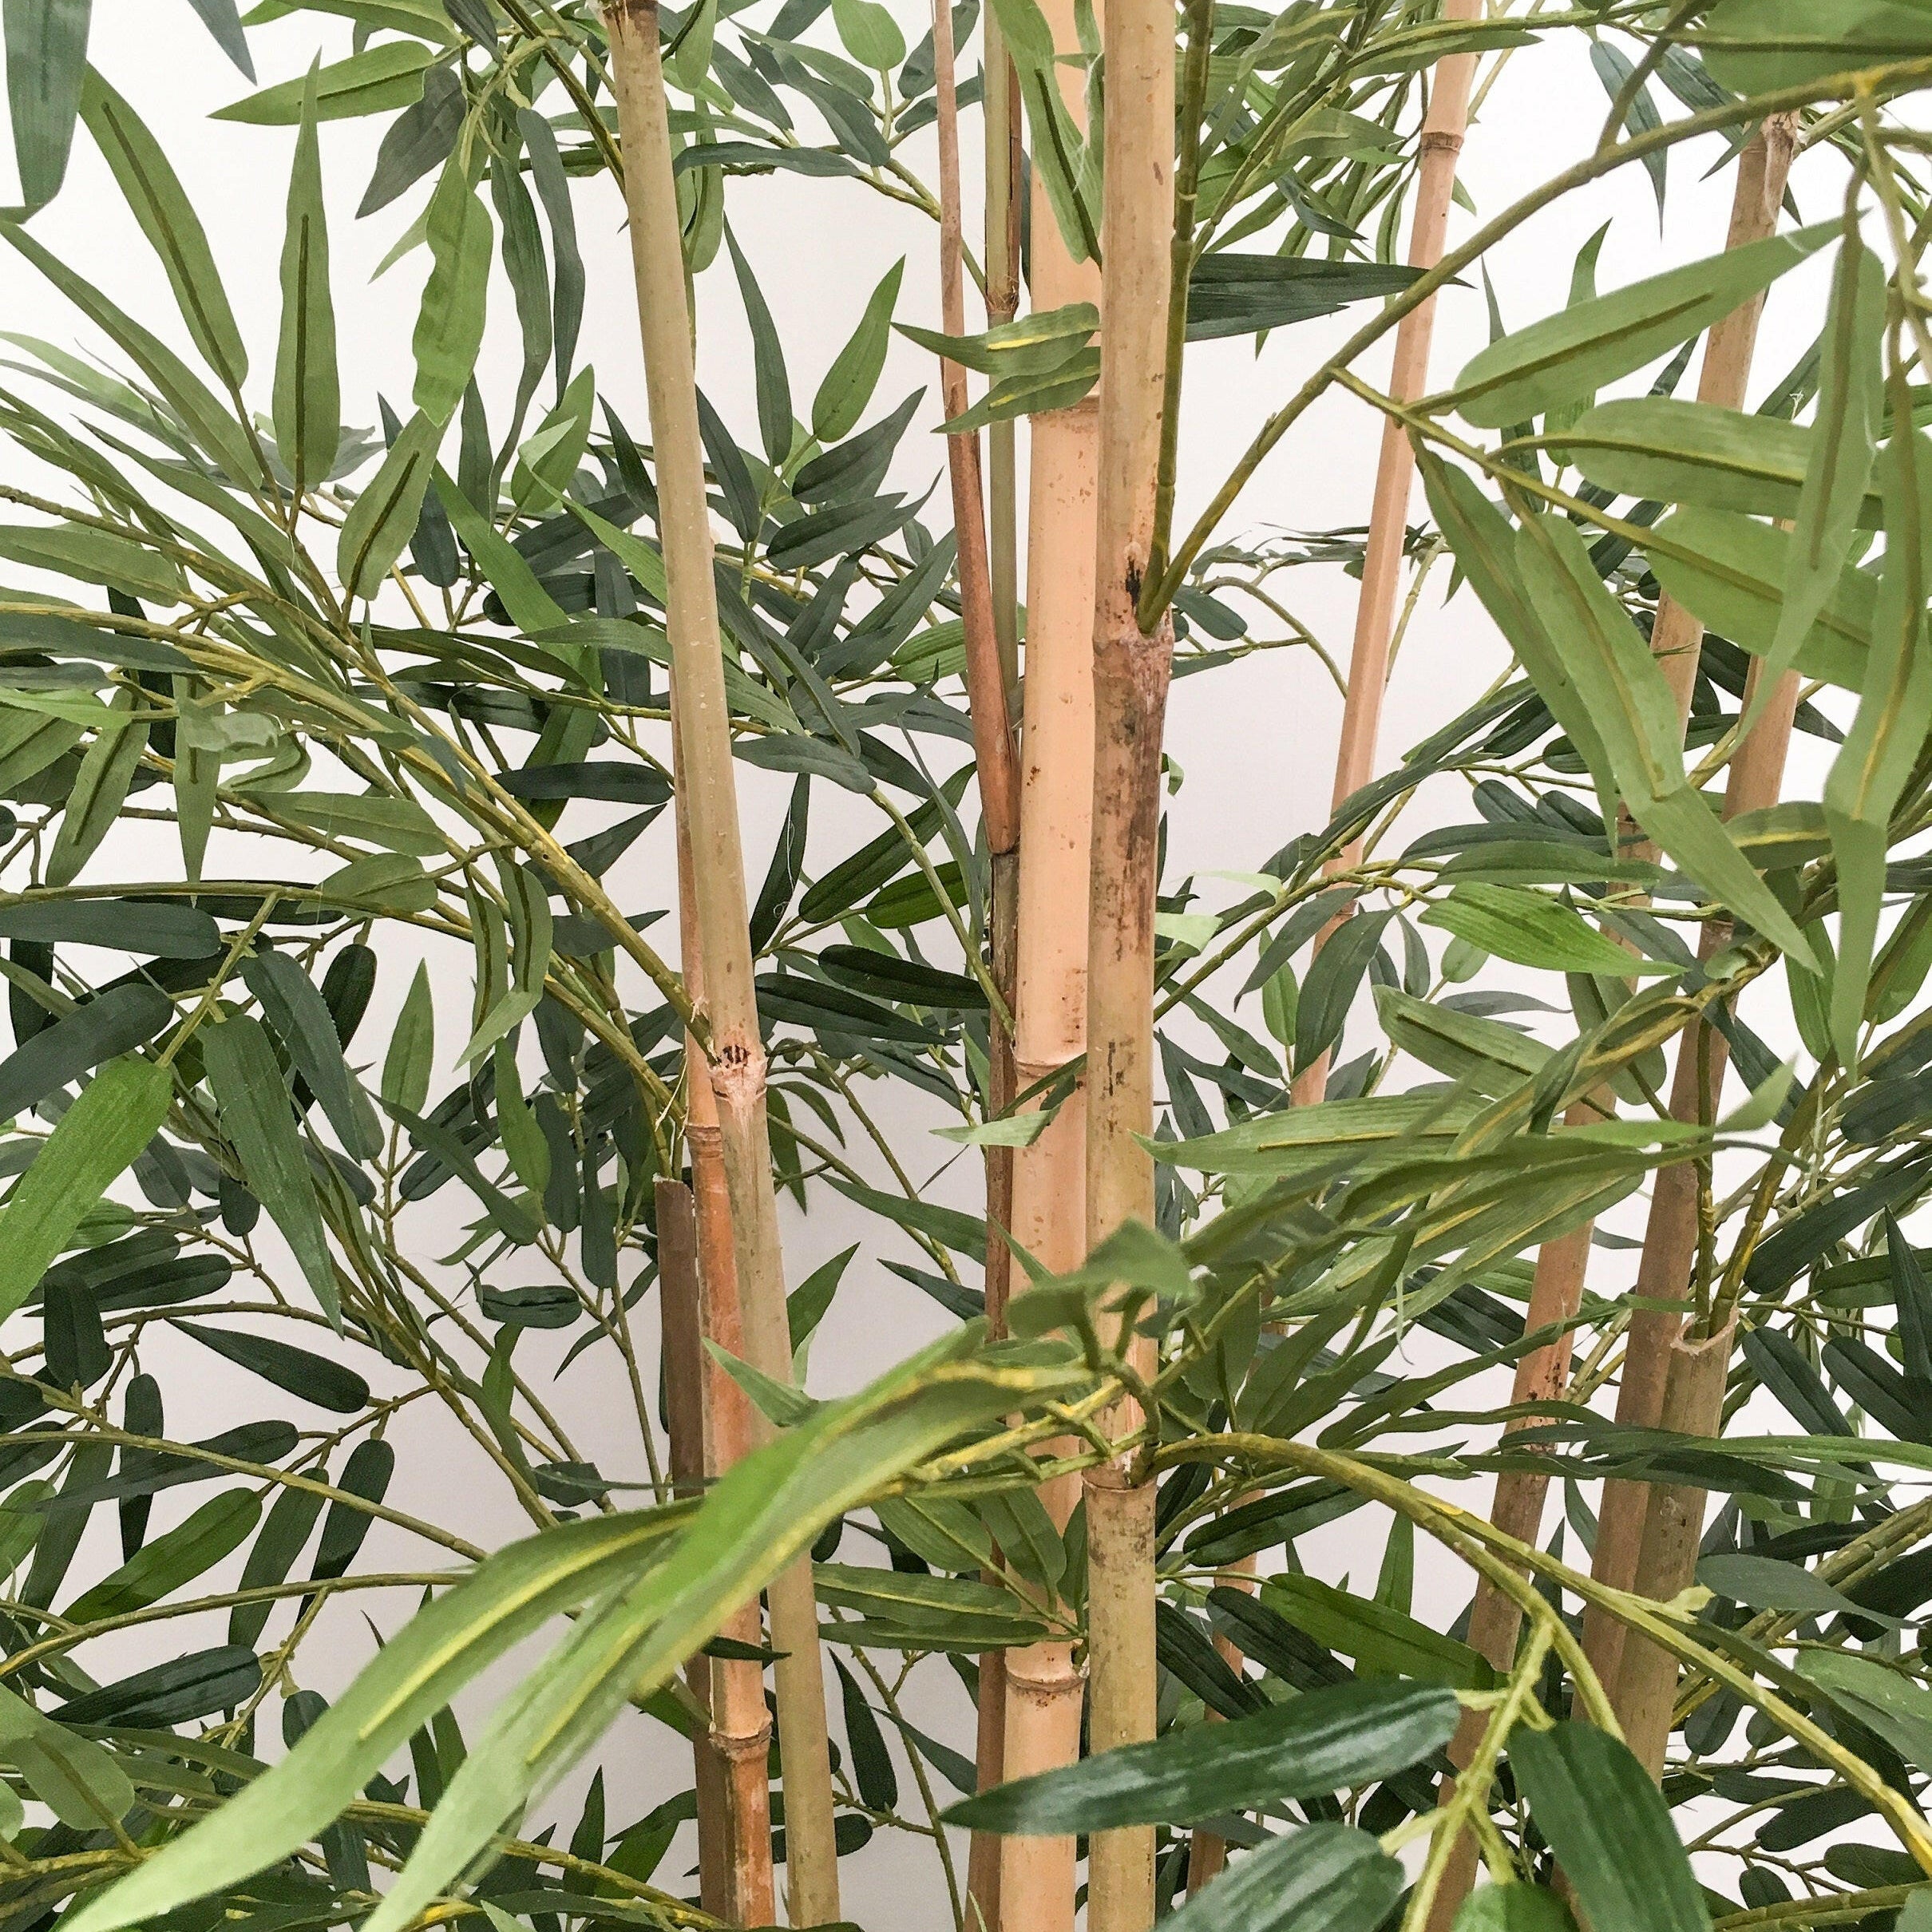 Showing close up detail of a hand built 9ft/270cm/2.7m Artificial Bamboo Tree